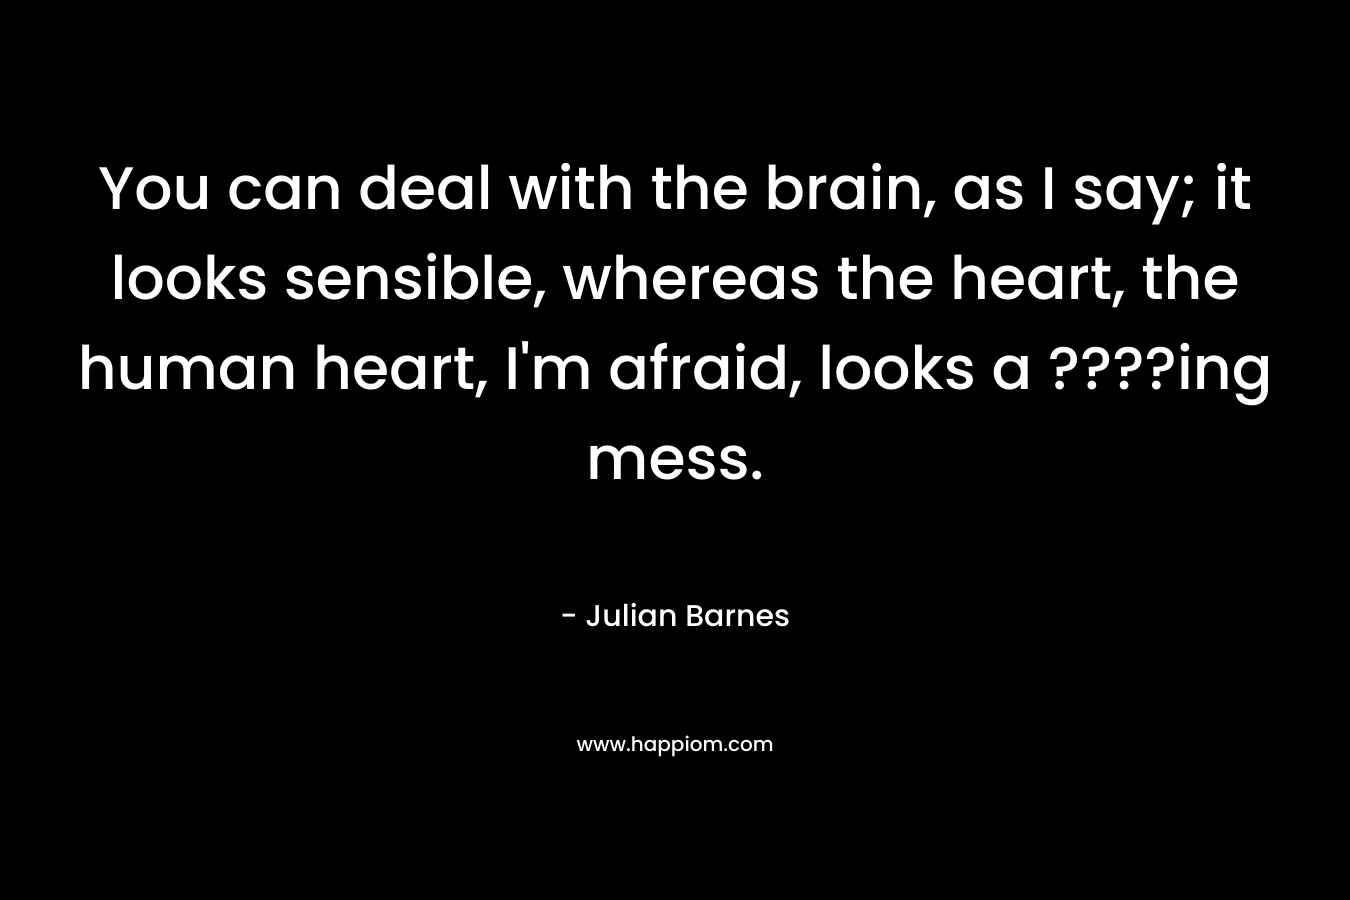 You can deal with the brain, as I say; it looks sensible, whereas the heart, the human heart, I'm afraid, looks a ????ing mess.